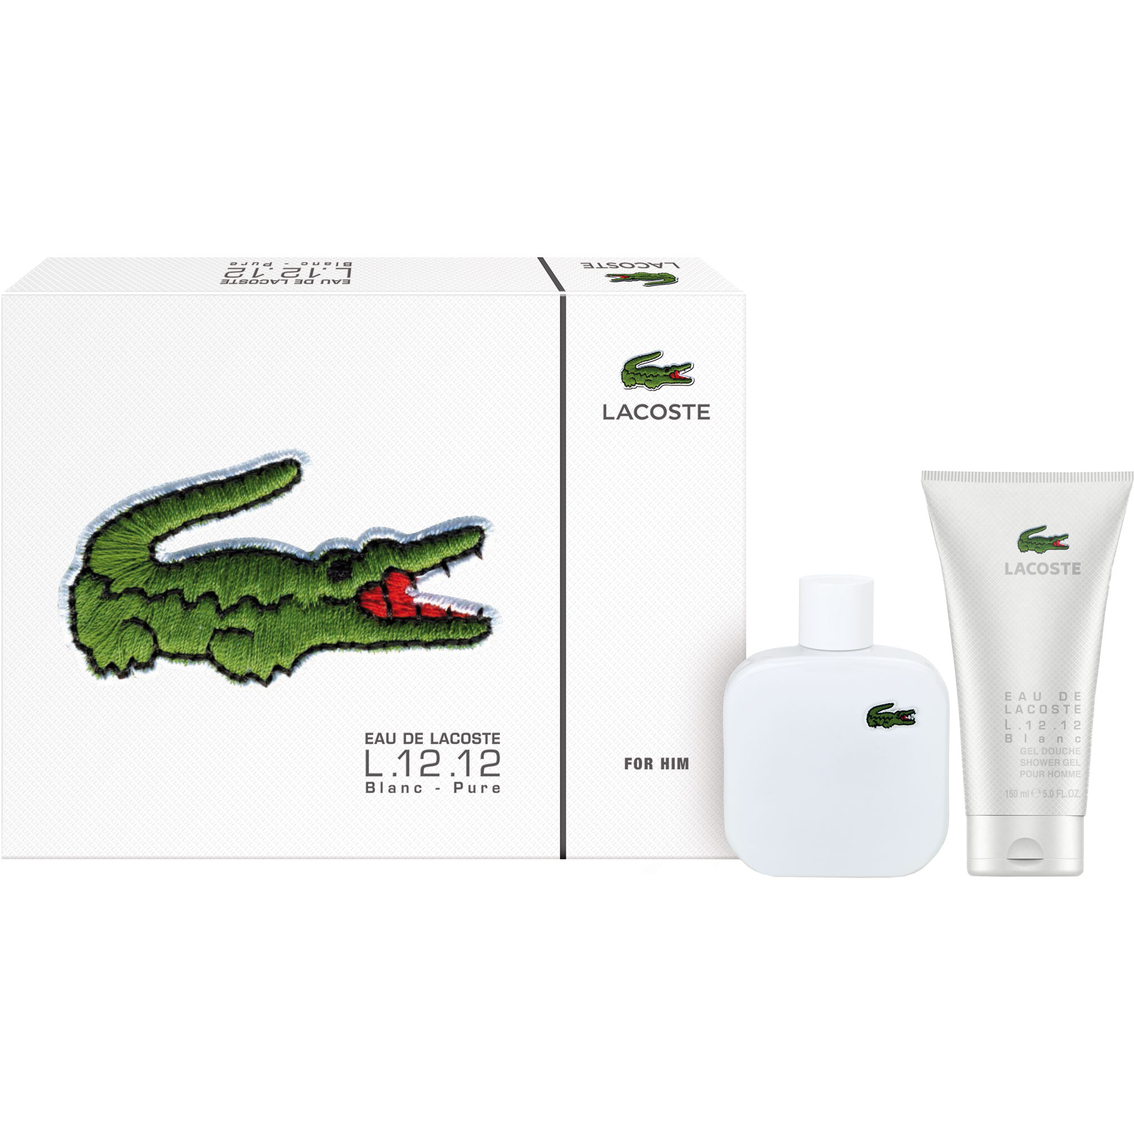 Lacoste White Gift Set | Gifts For Him | Beauty & Shop The